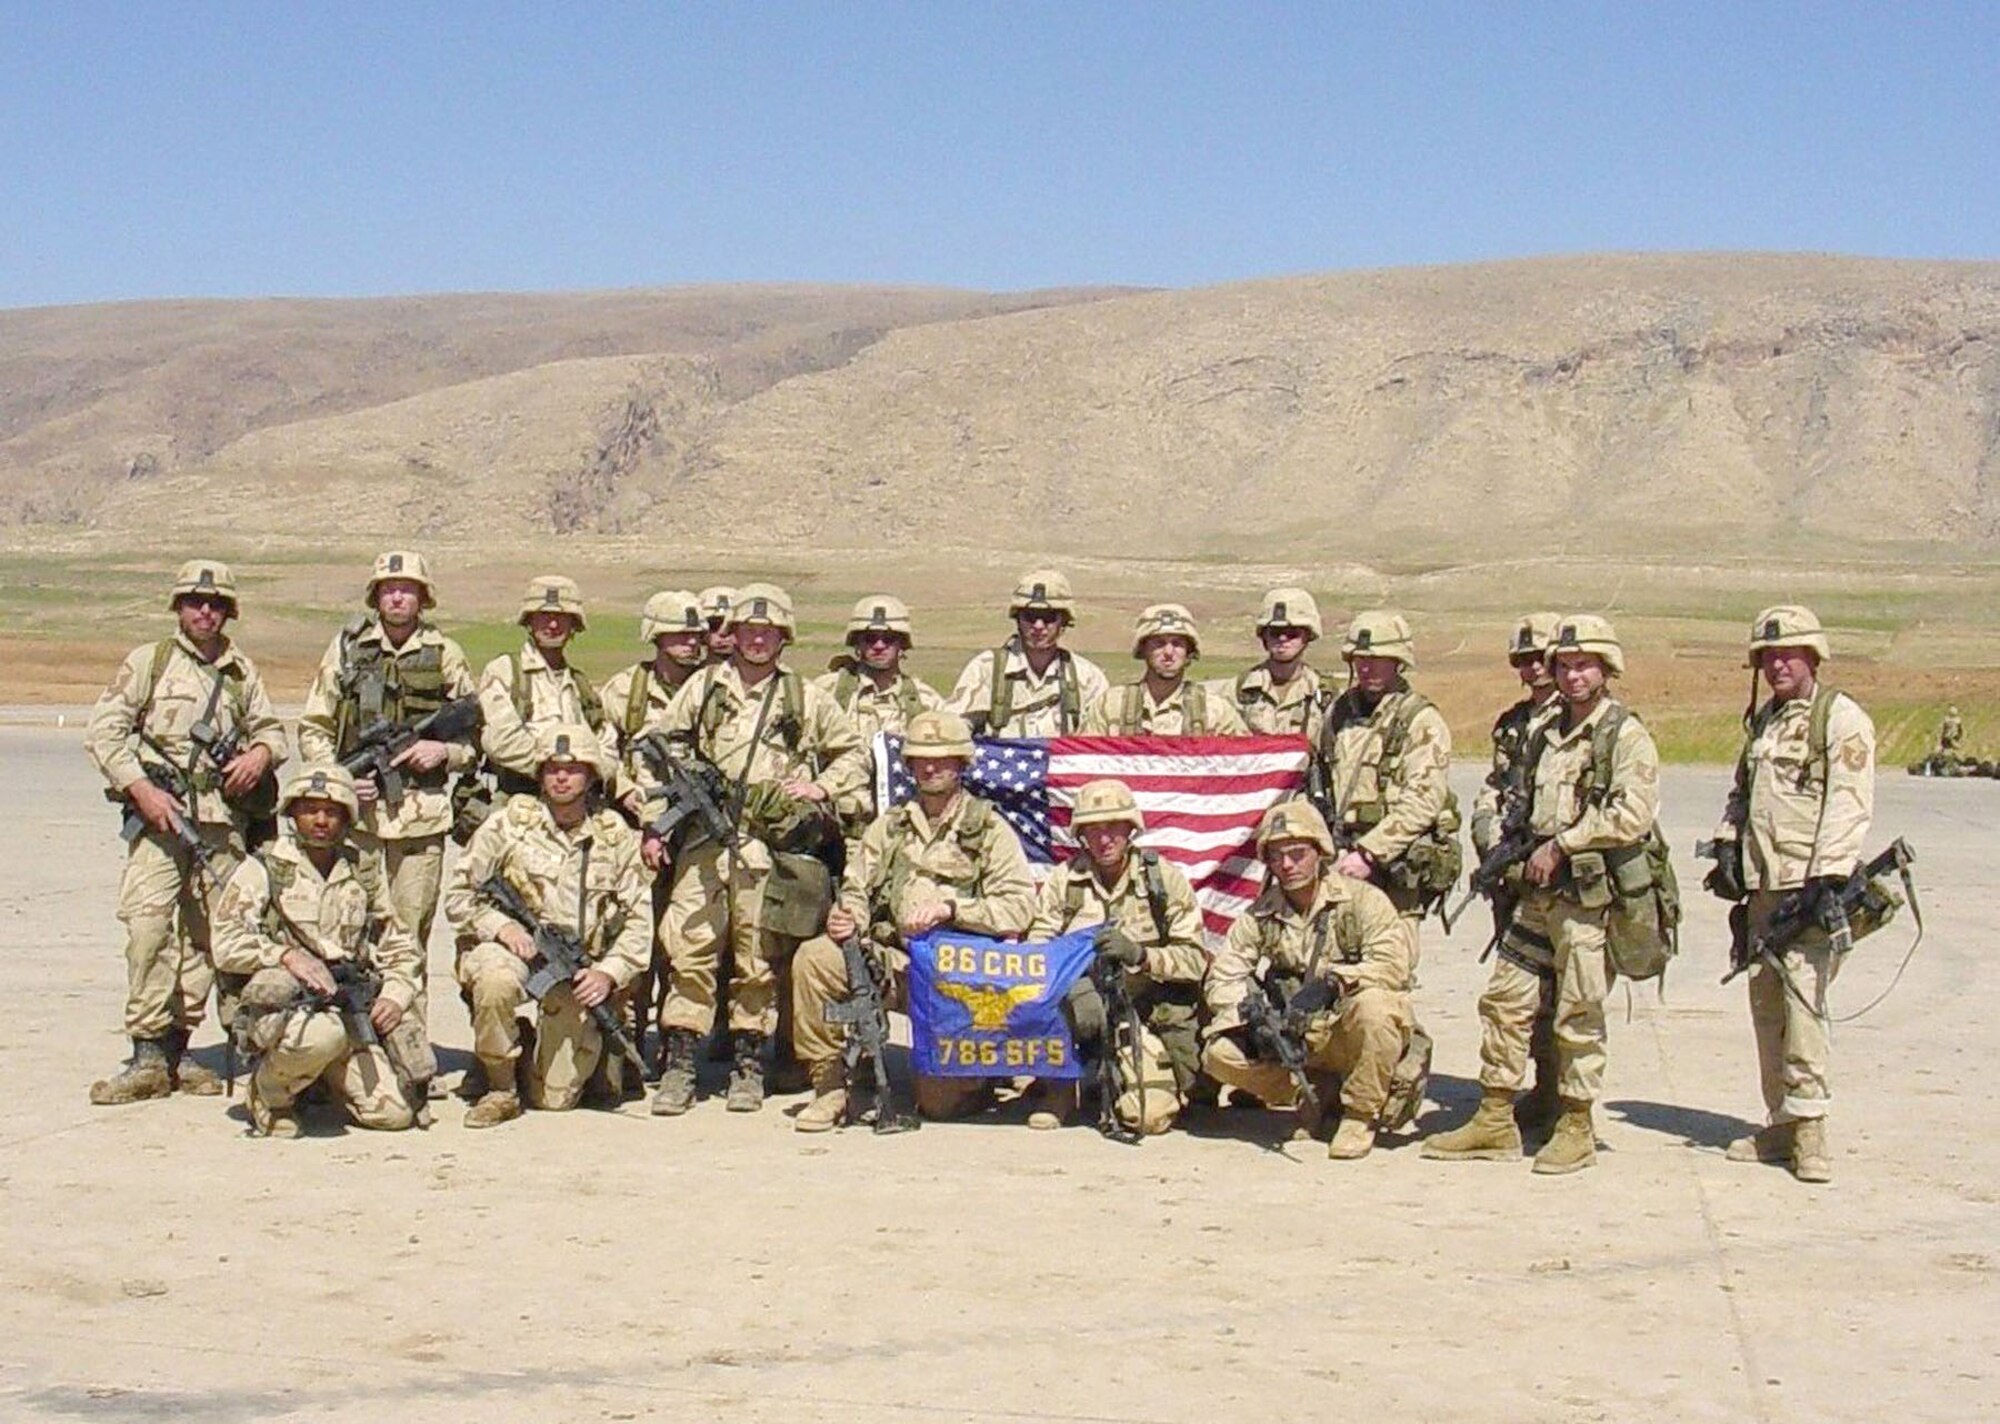 Maj. Erik Rundquist (kneeling, second from right) and Col. Steve Weart (kneeling, third from right), 86th Contingency Group commander, with some of the Air Force team that jumped on Bashur airfield. Two-thirds of the team were Security Forces personnel. (U.S. Air Force photo)